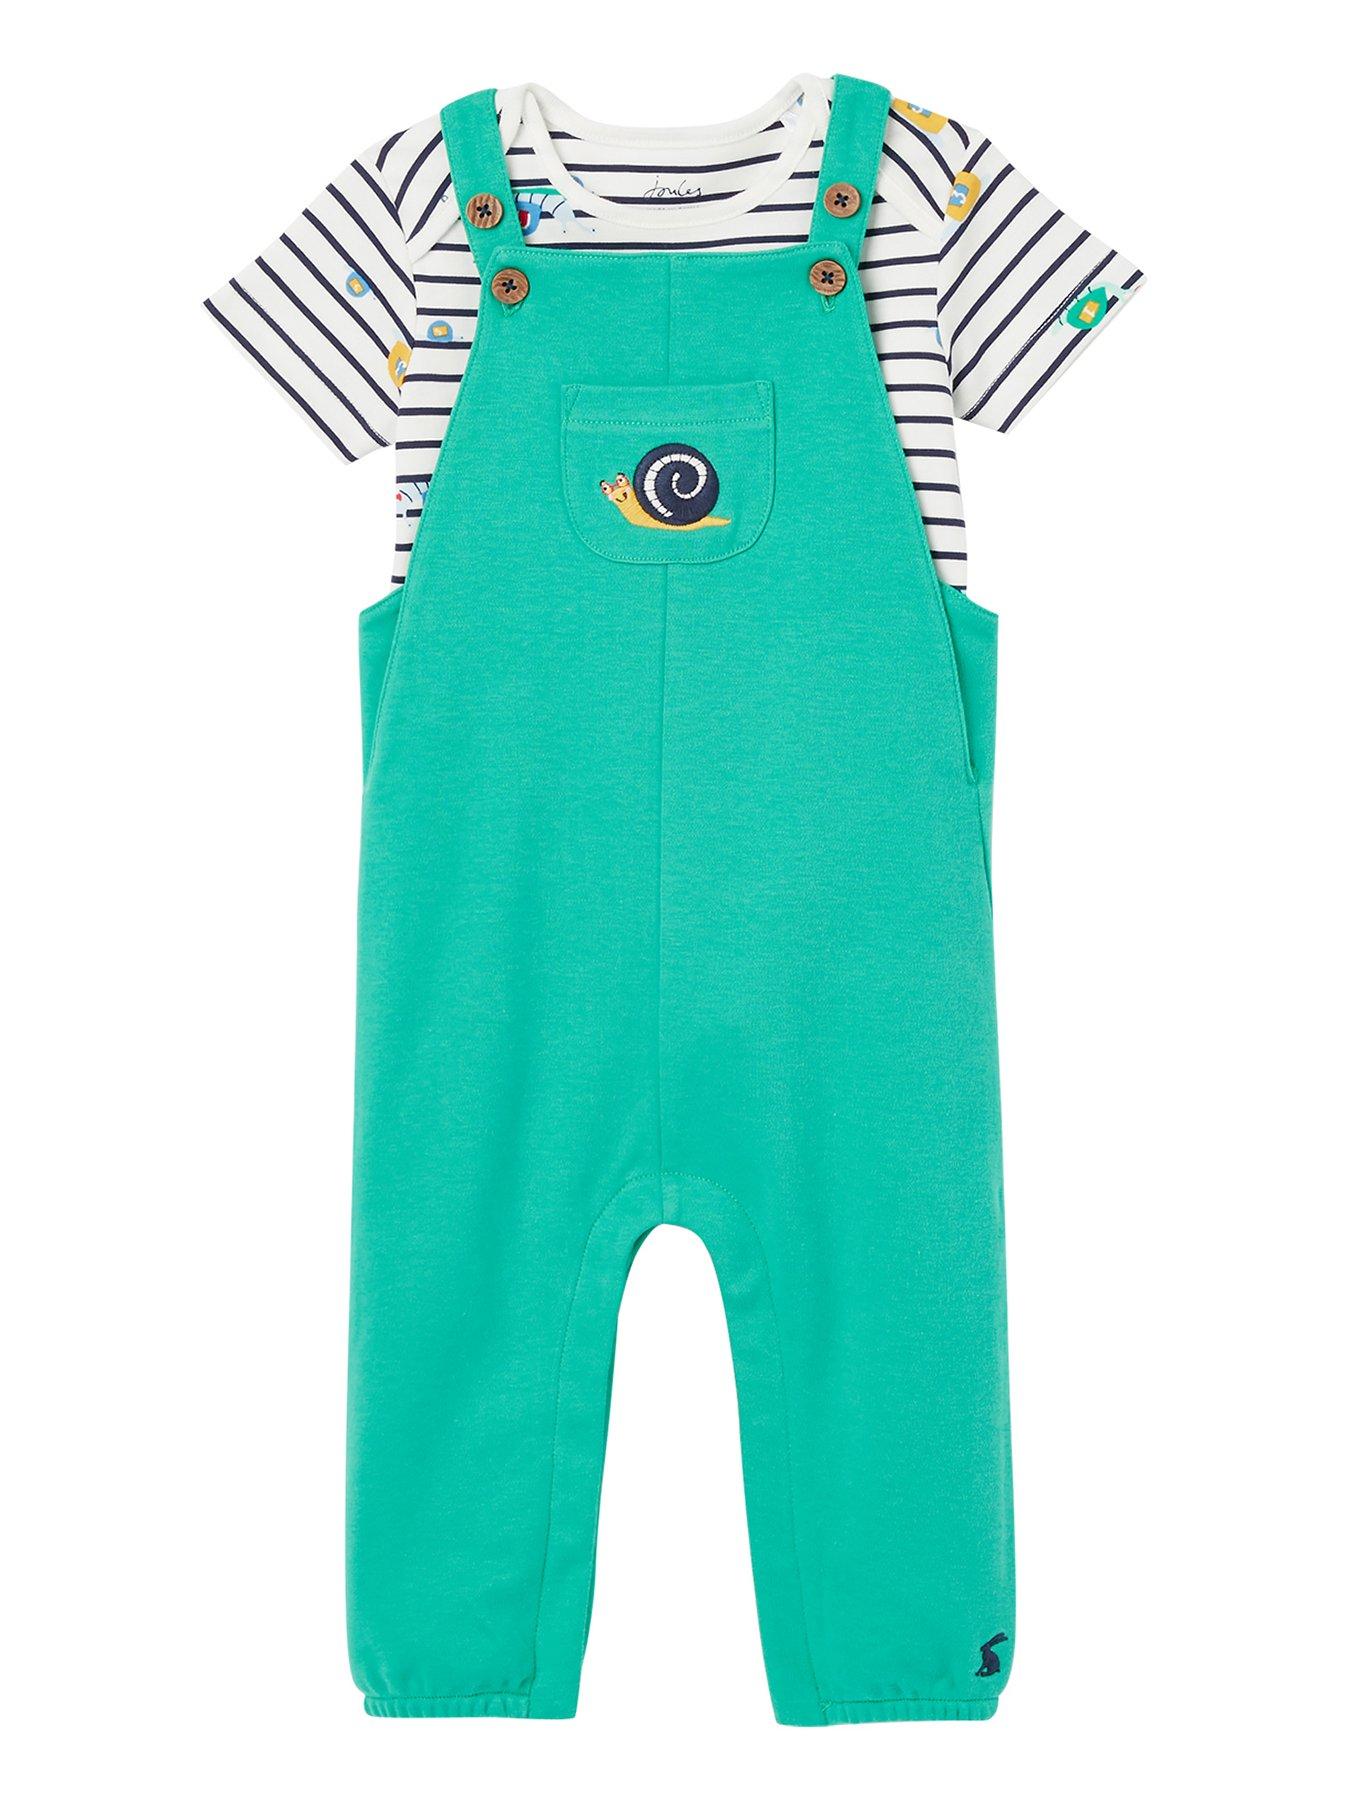 Baby Clothes Baby Boys Wilbur Snail Print 2 Piece Dungaree and Bodysuit Set - Green